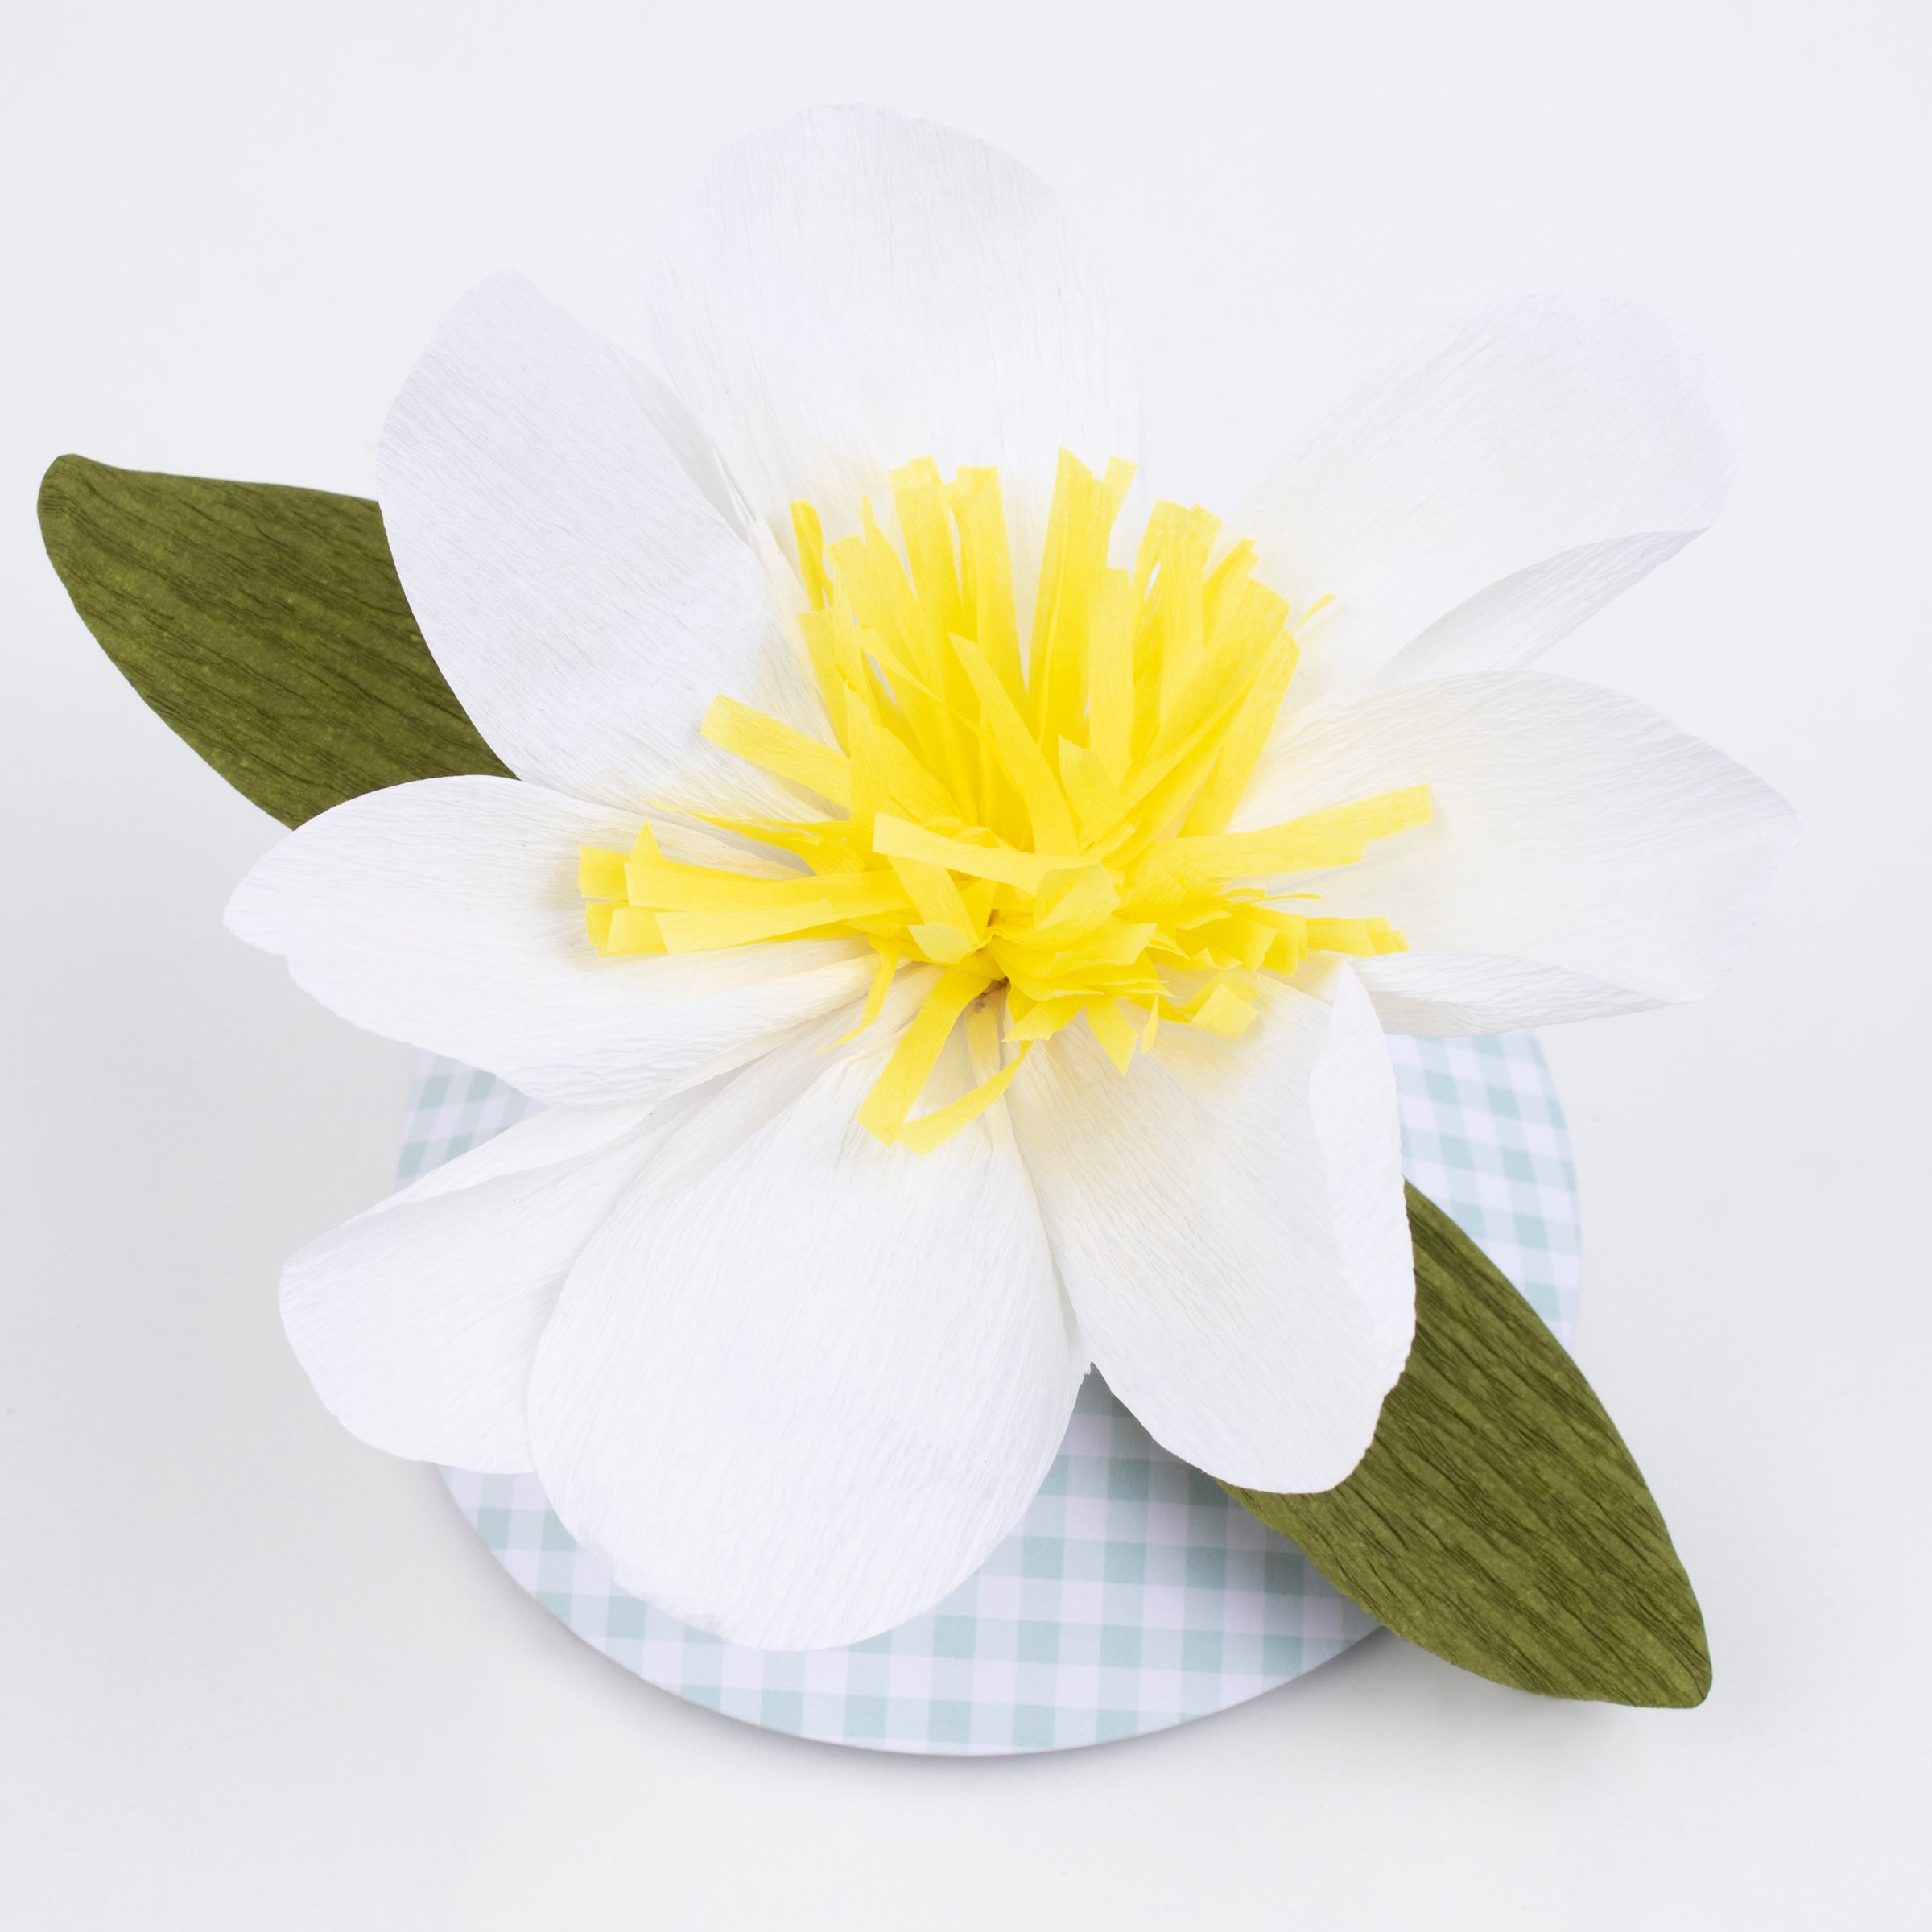 Our fabulous paper hats, with a large flower design and on trend green gingham details, are the perfect kids party hats.